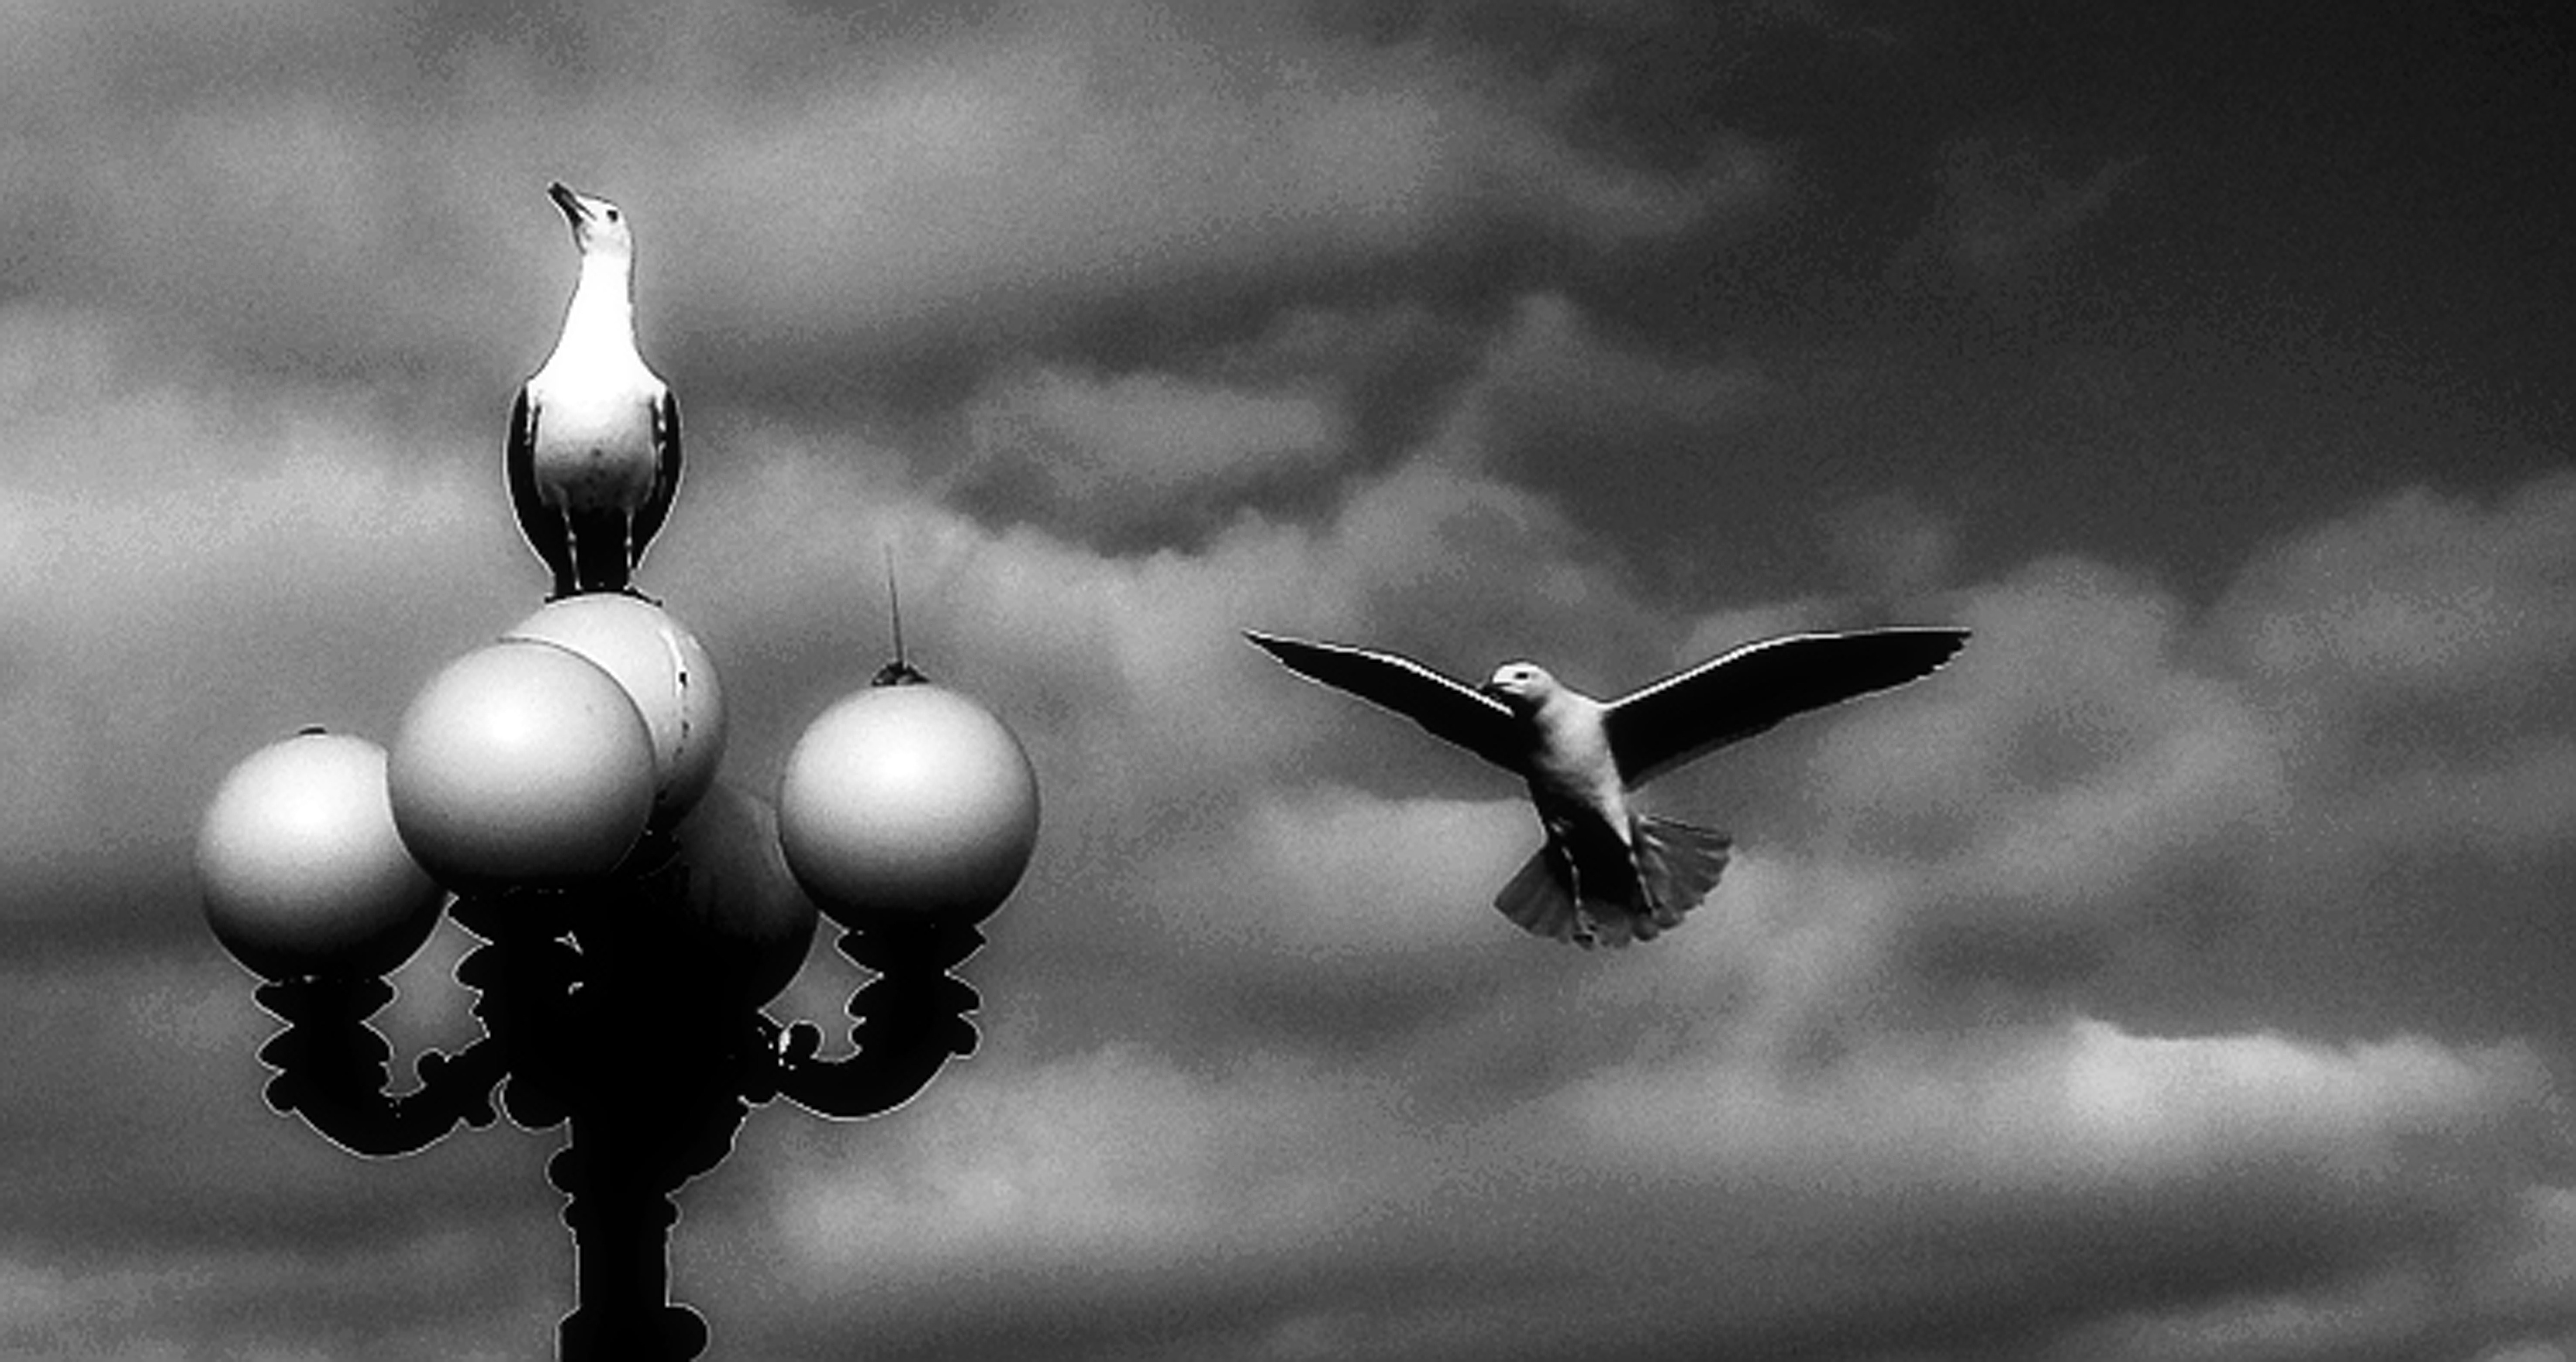 grayscale photography of 2 bird